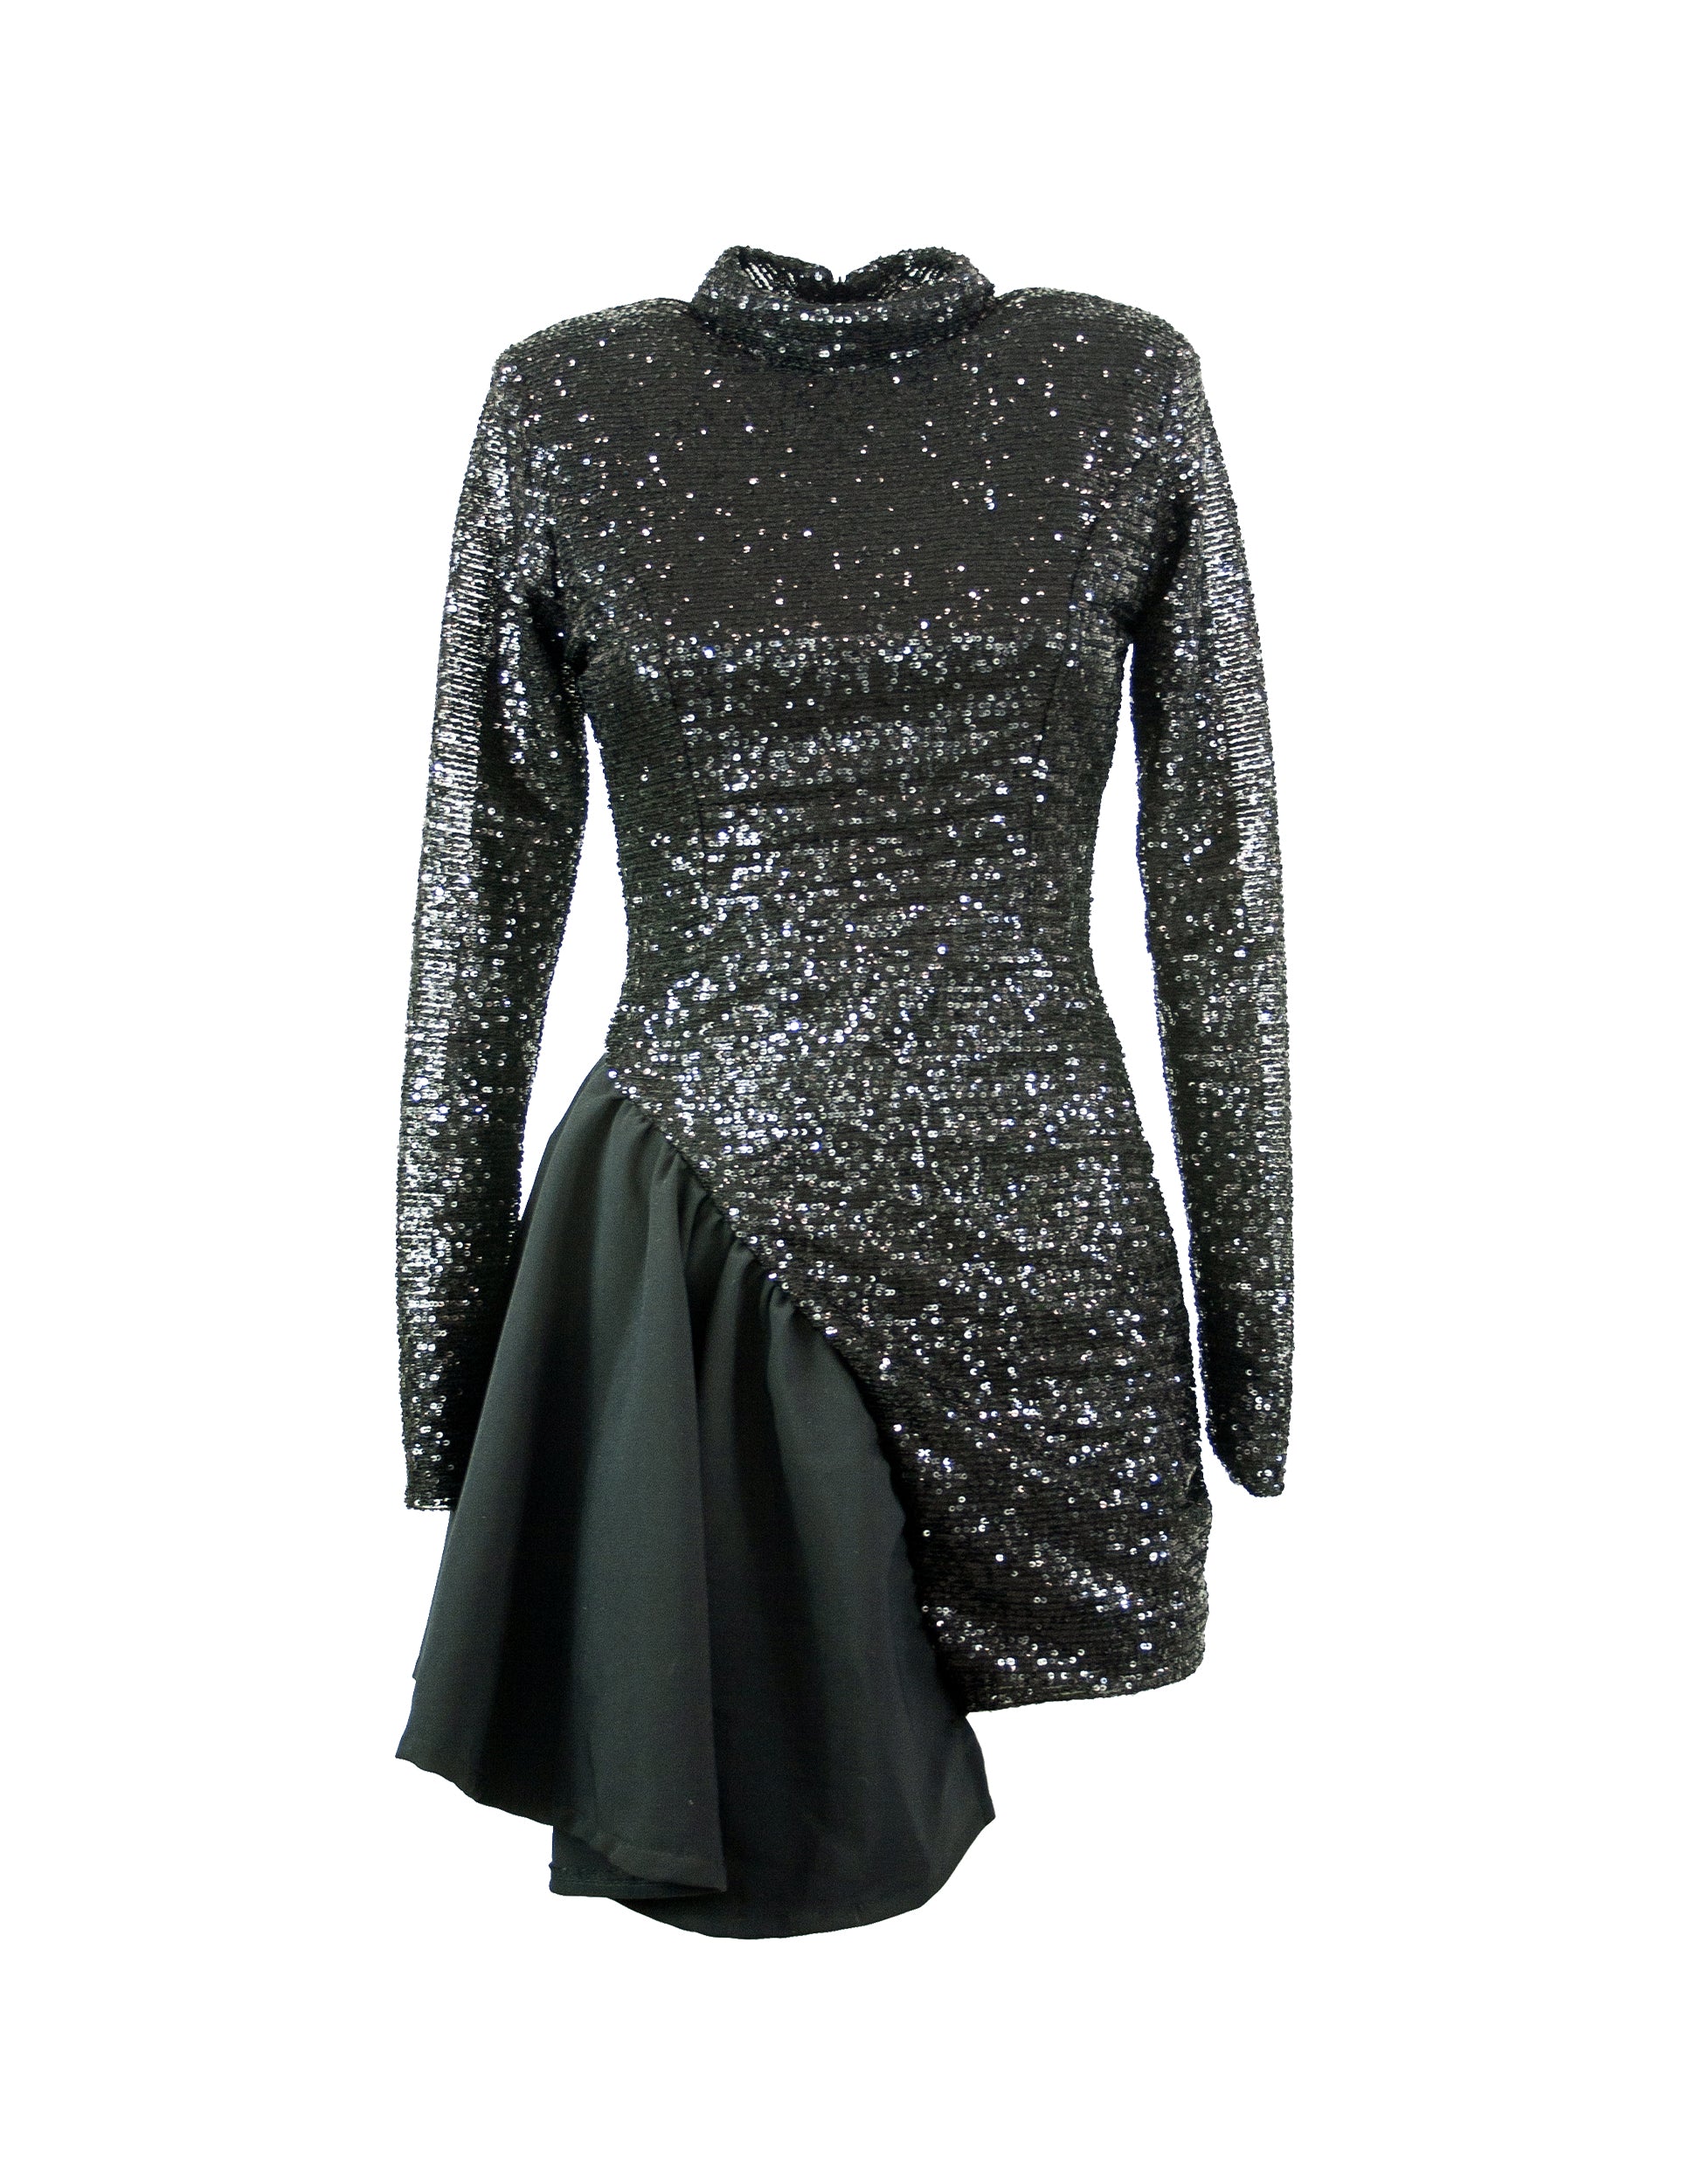 KENDALL AND KYLIE
Kendall + Kylie black dress in sequins